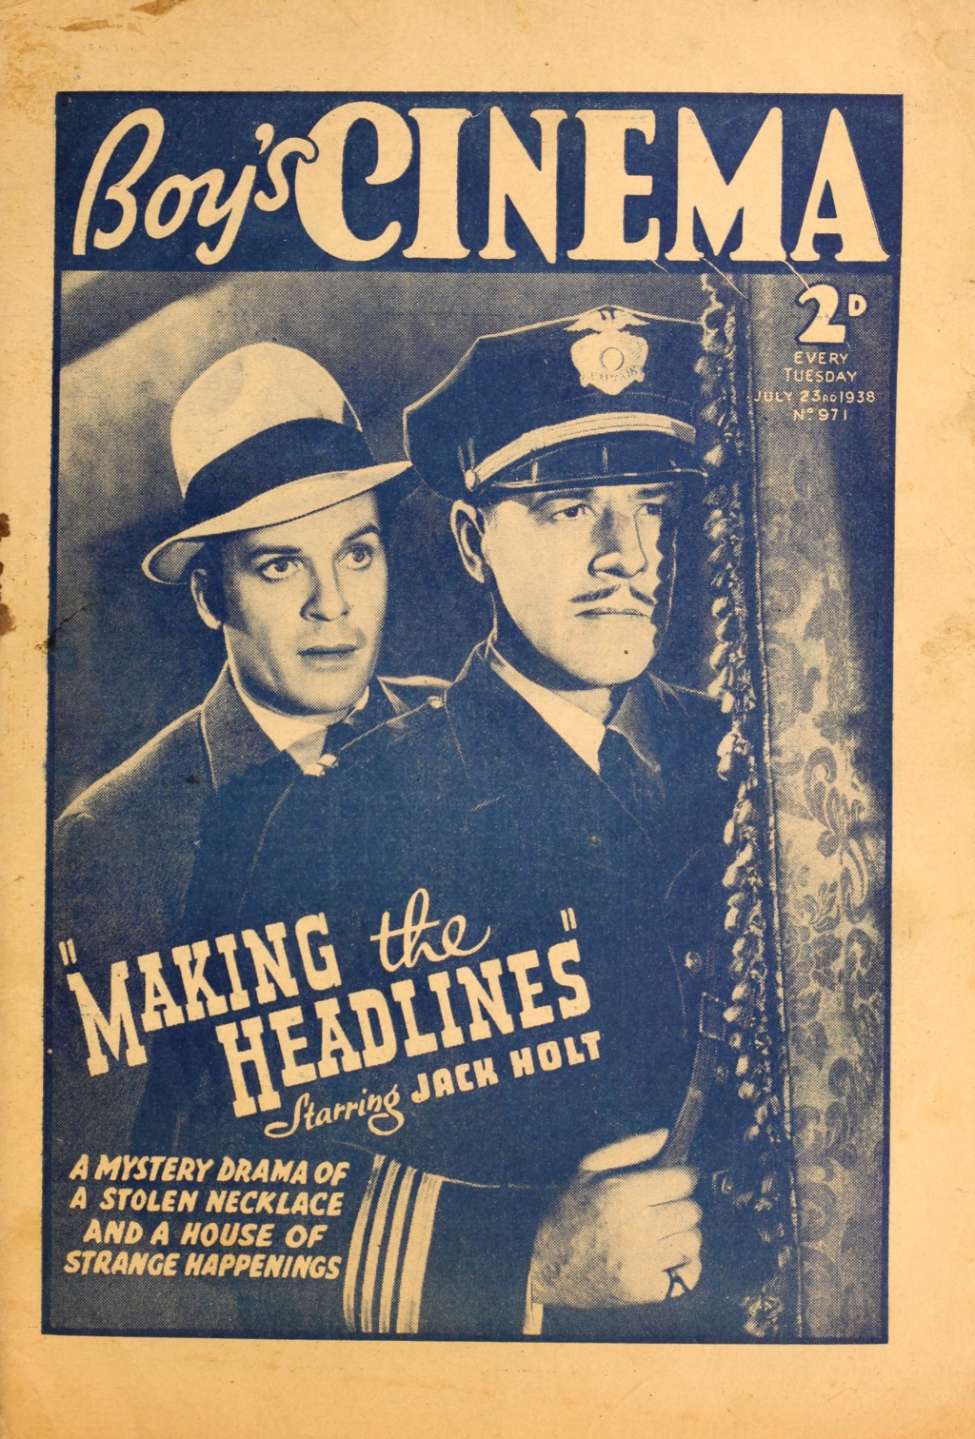 Book Cover For Boy's Cinema 971 - Making the Headlines - Jack Holt